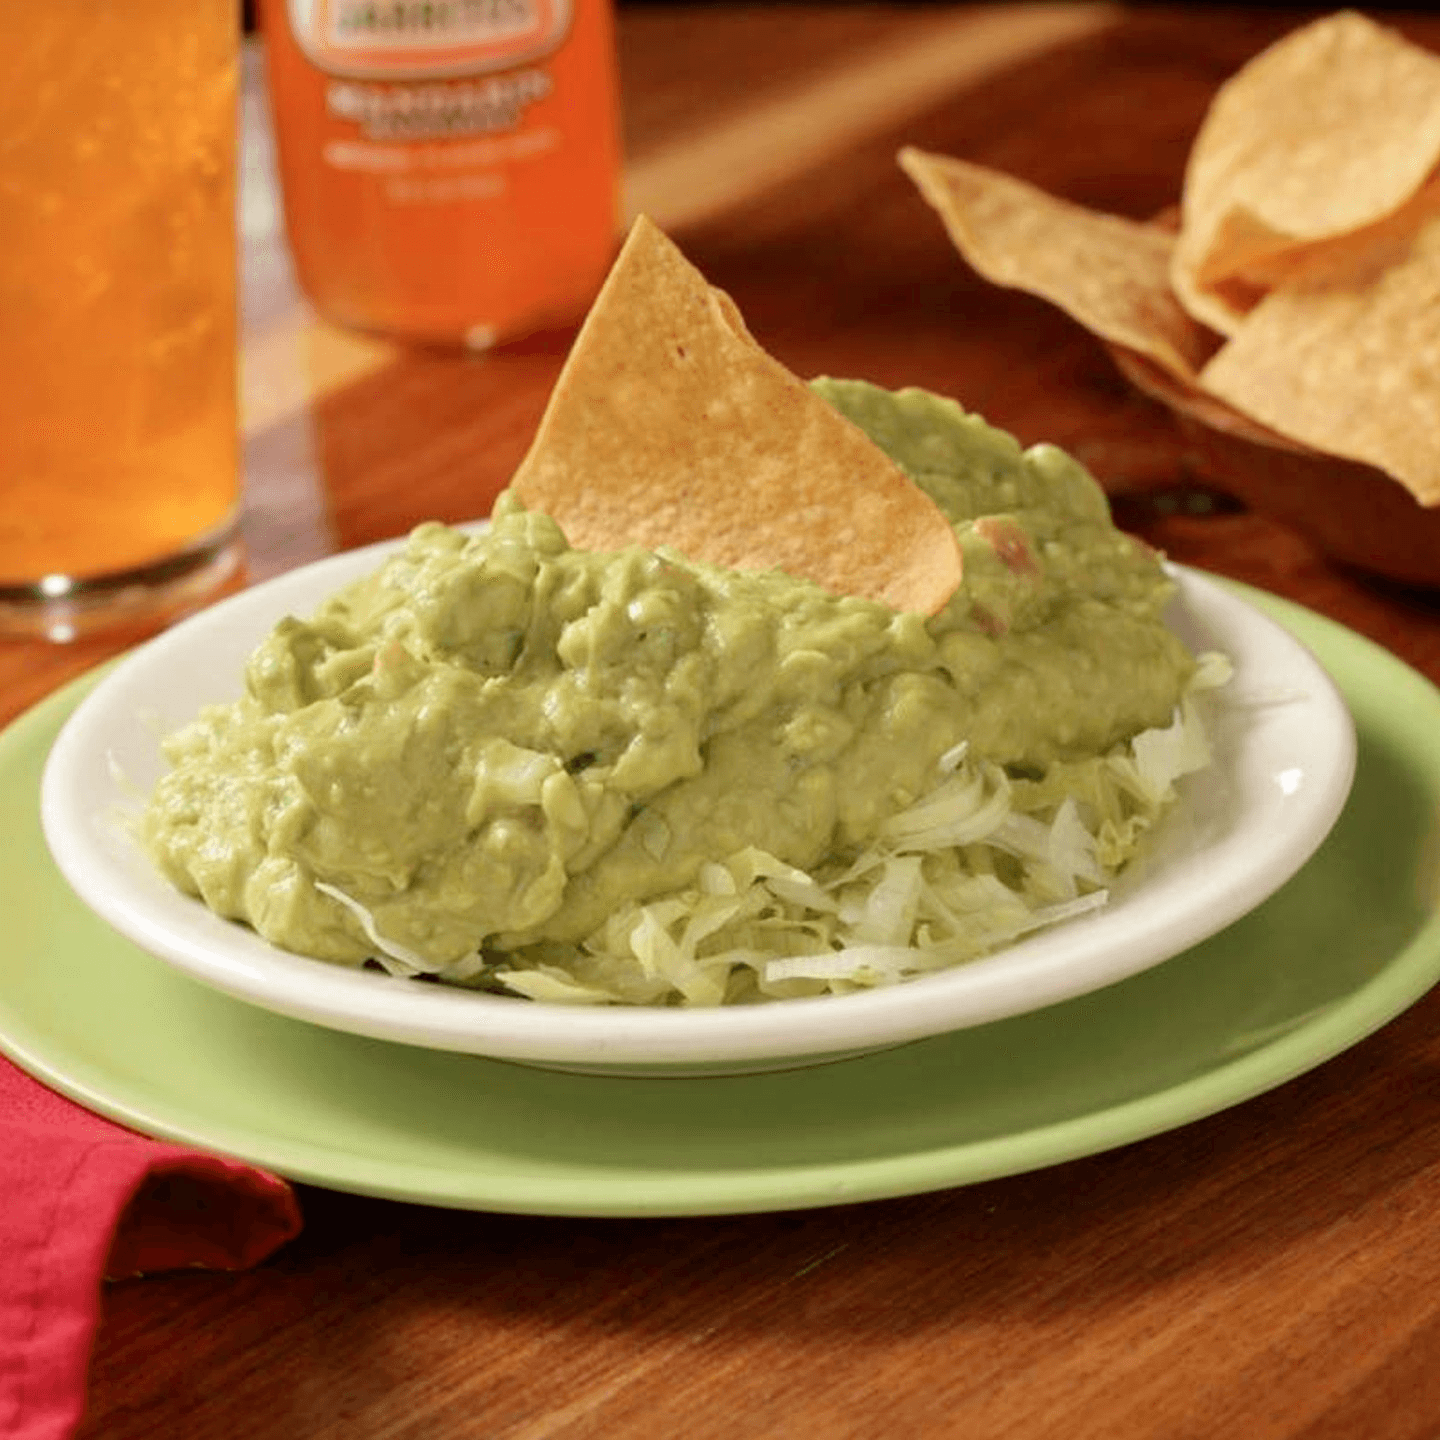 THE BEST GUAC IN TOWN